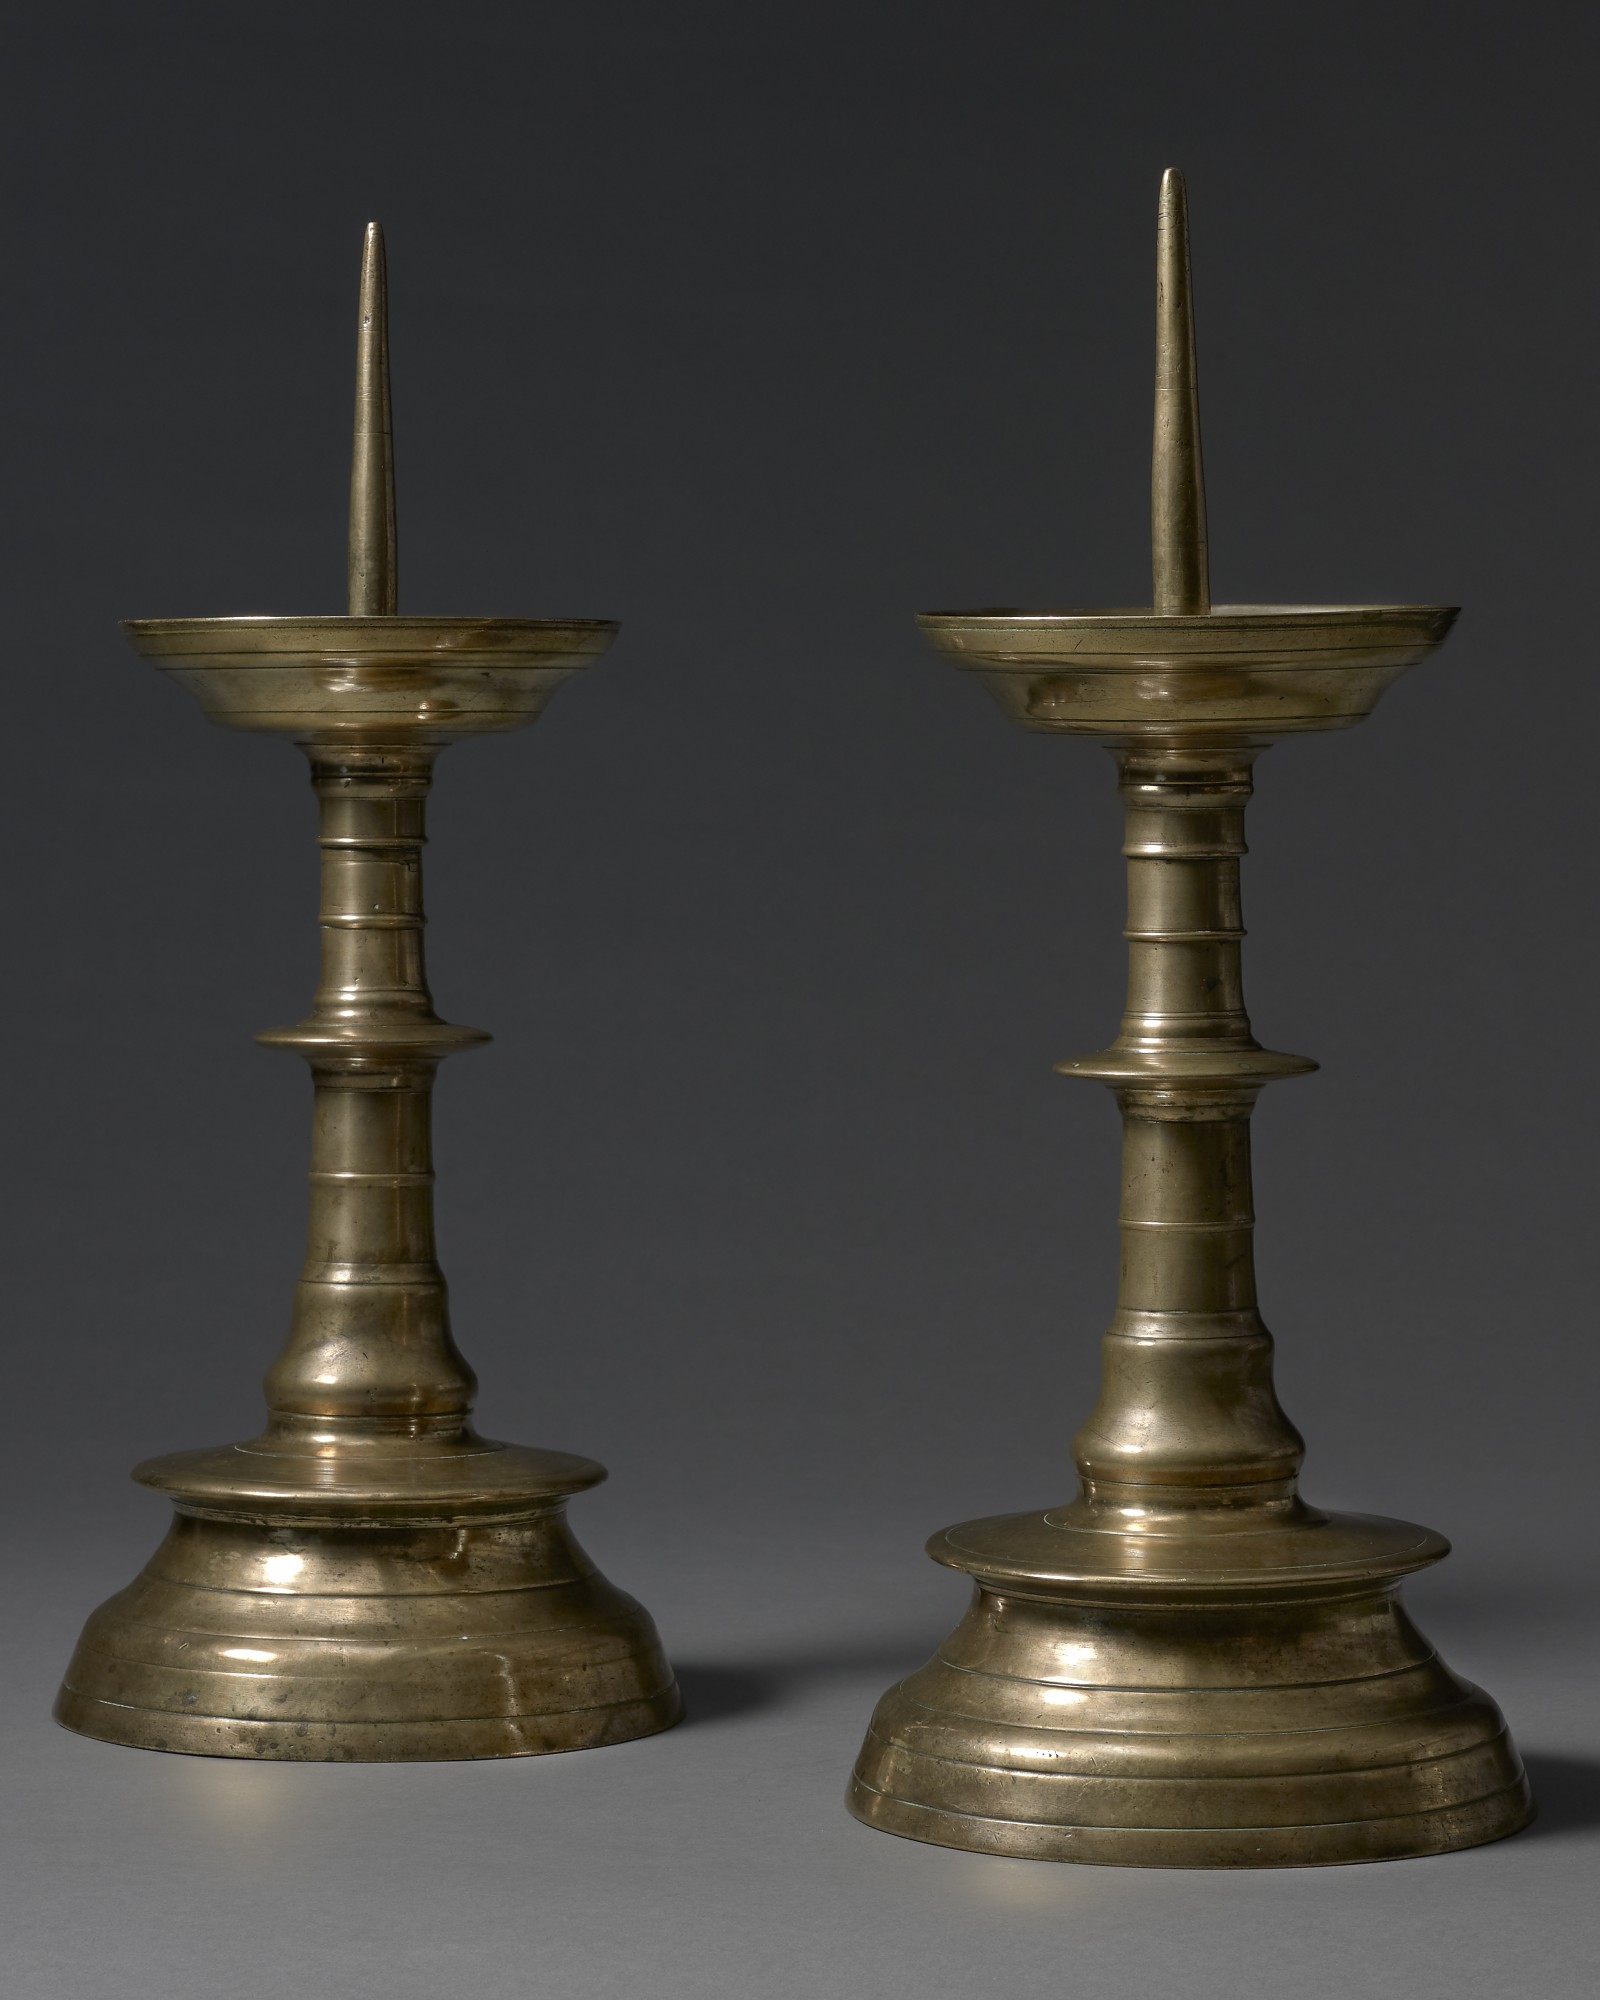 A Pair of Pricket Candlesticks, Works of Art